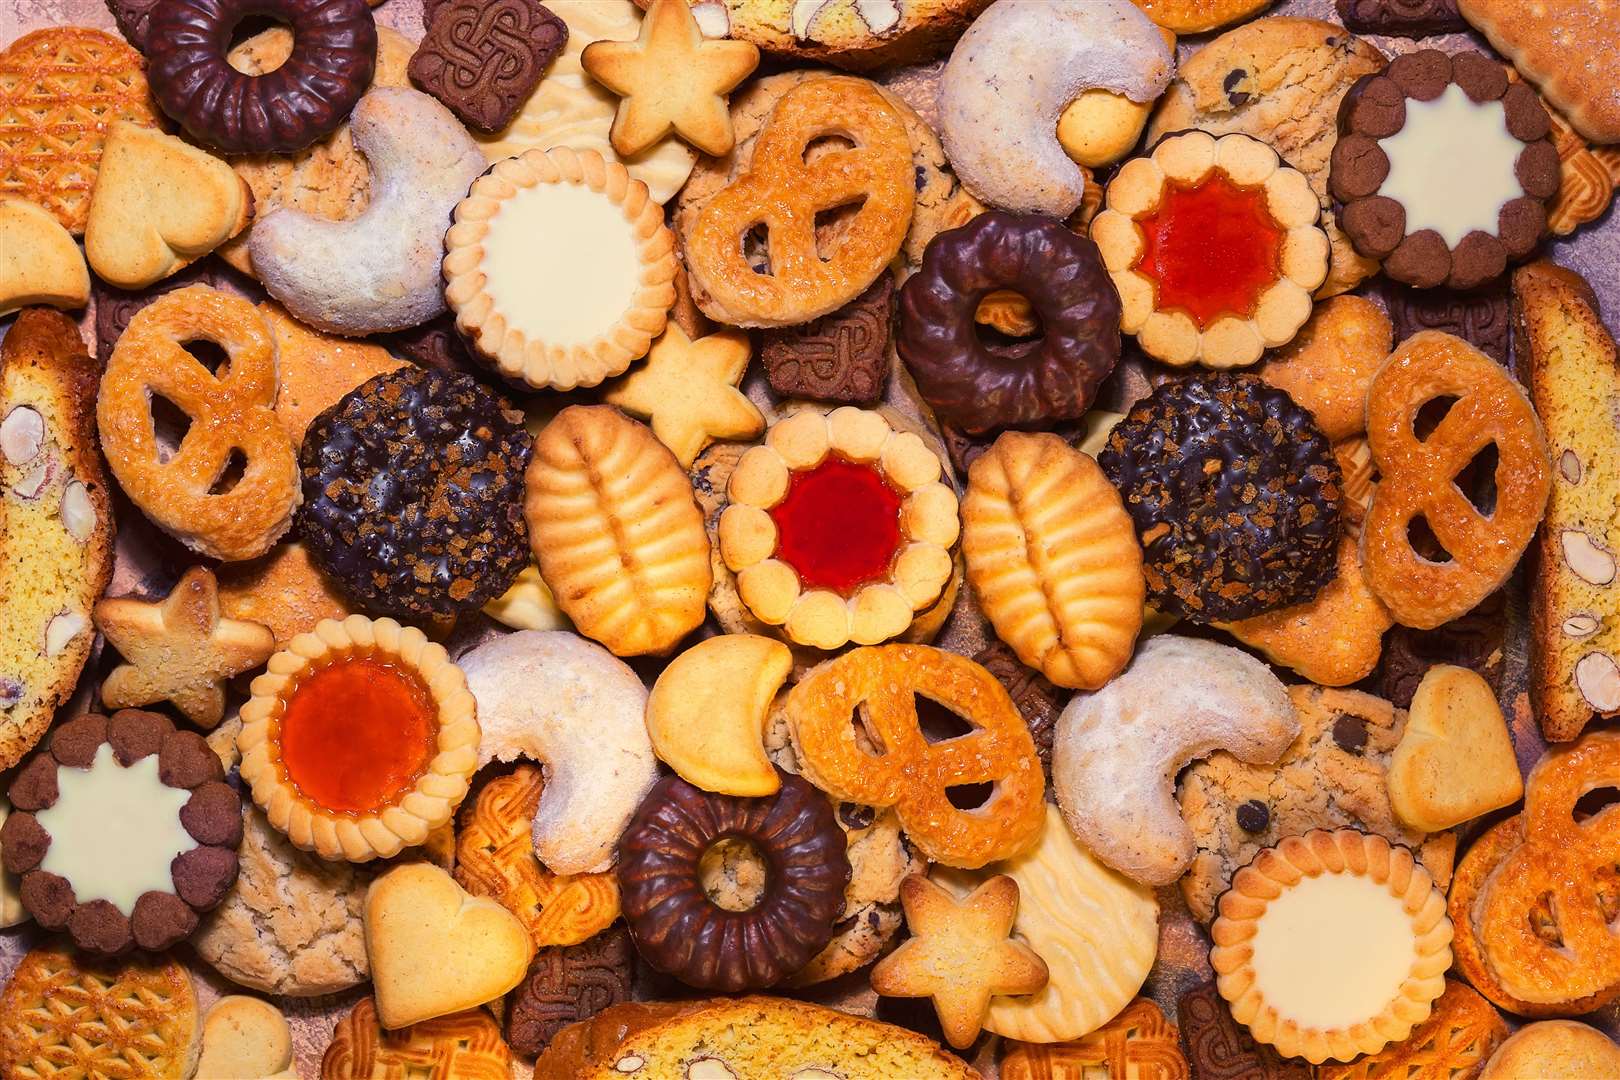 There is a biscuit for every palate.